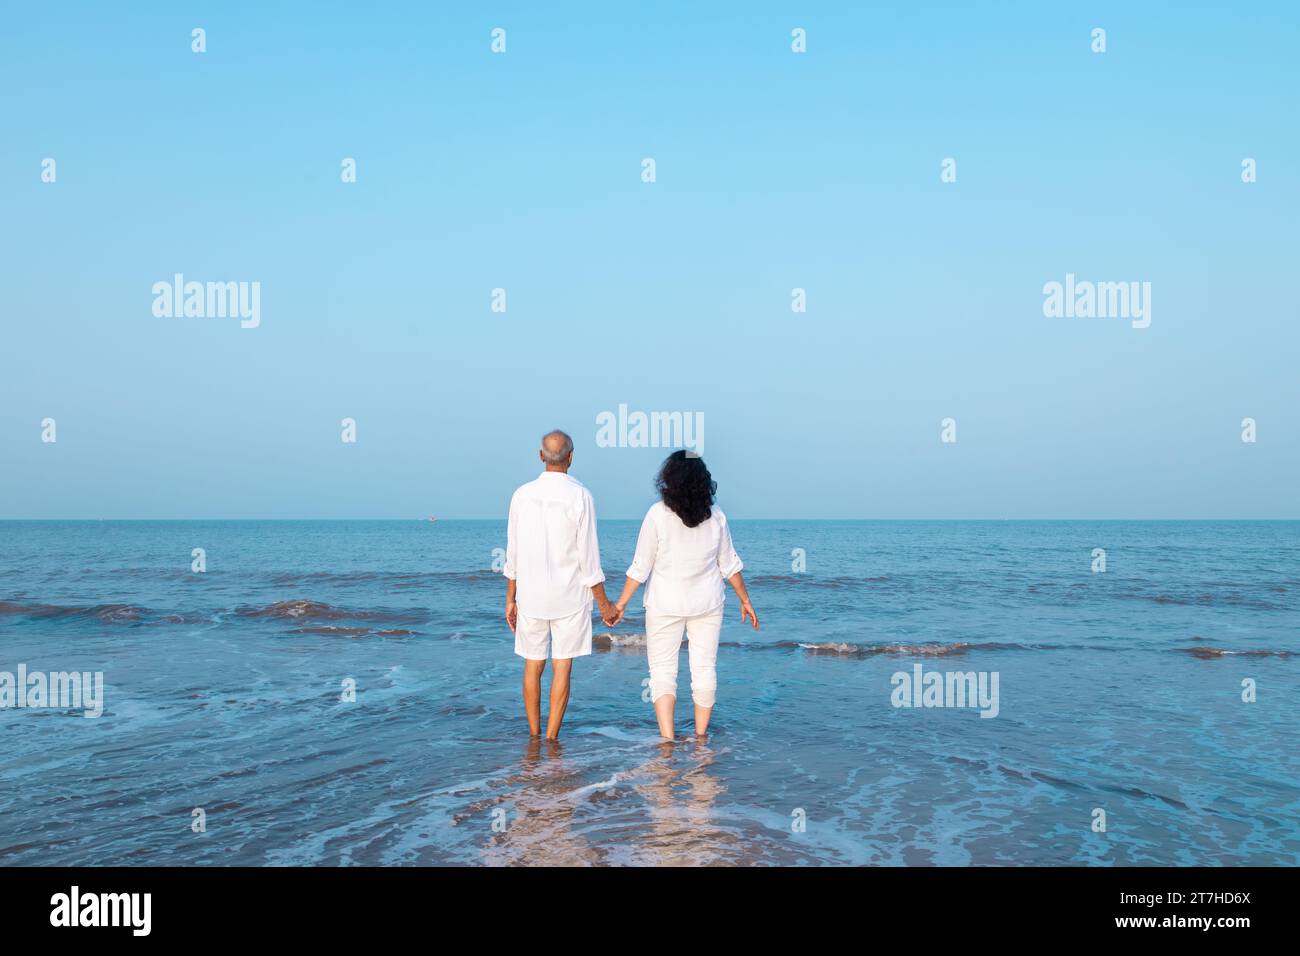 Happy senior indian couple wearing white cloths enjoying summer vacation, holiday at beach looking at sea. Copy space Stock Photo